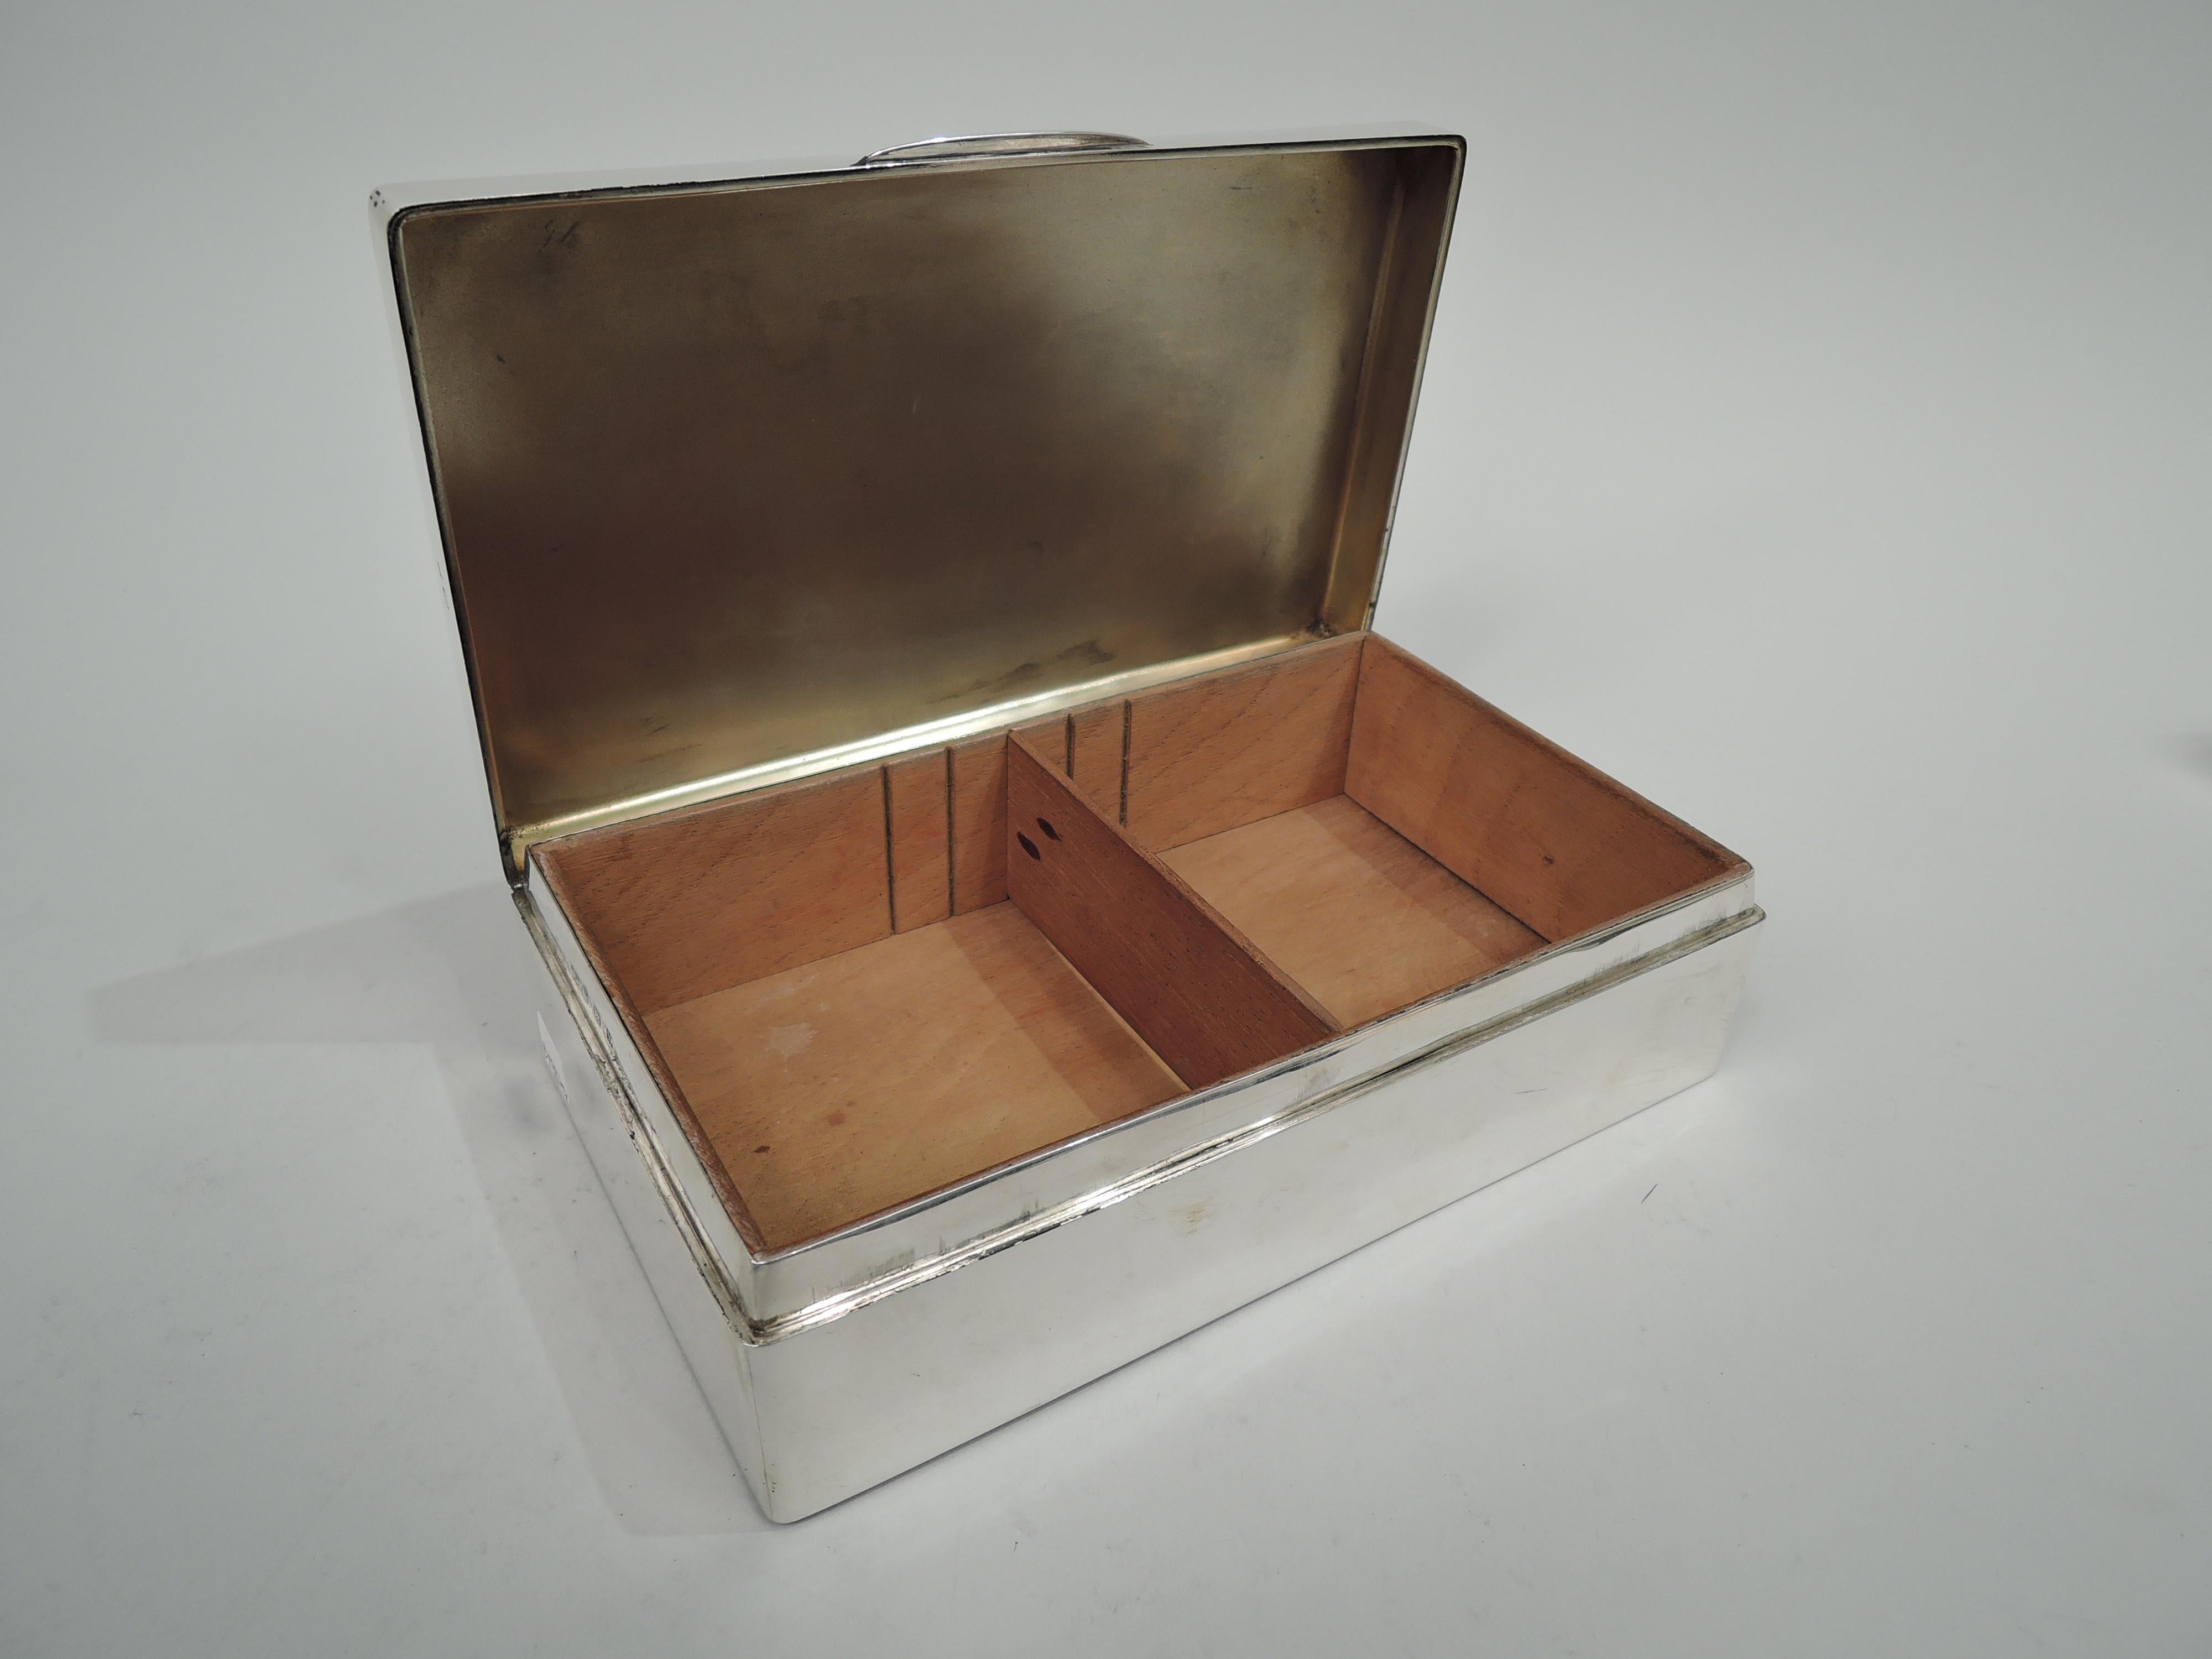 Early 20th Century English Modern Sterling Silver Box